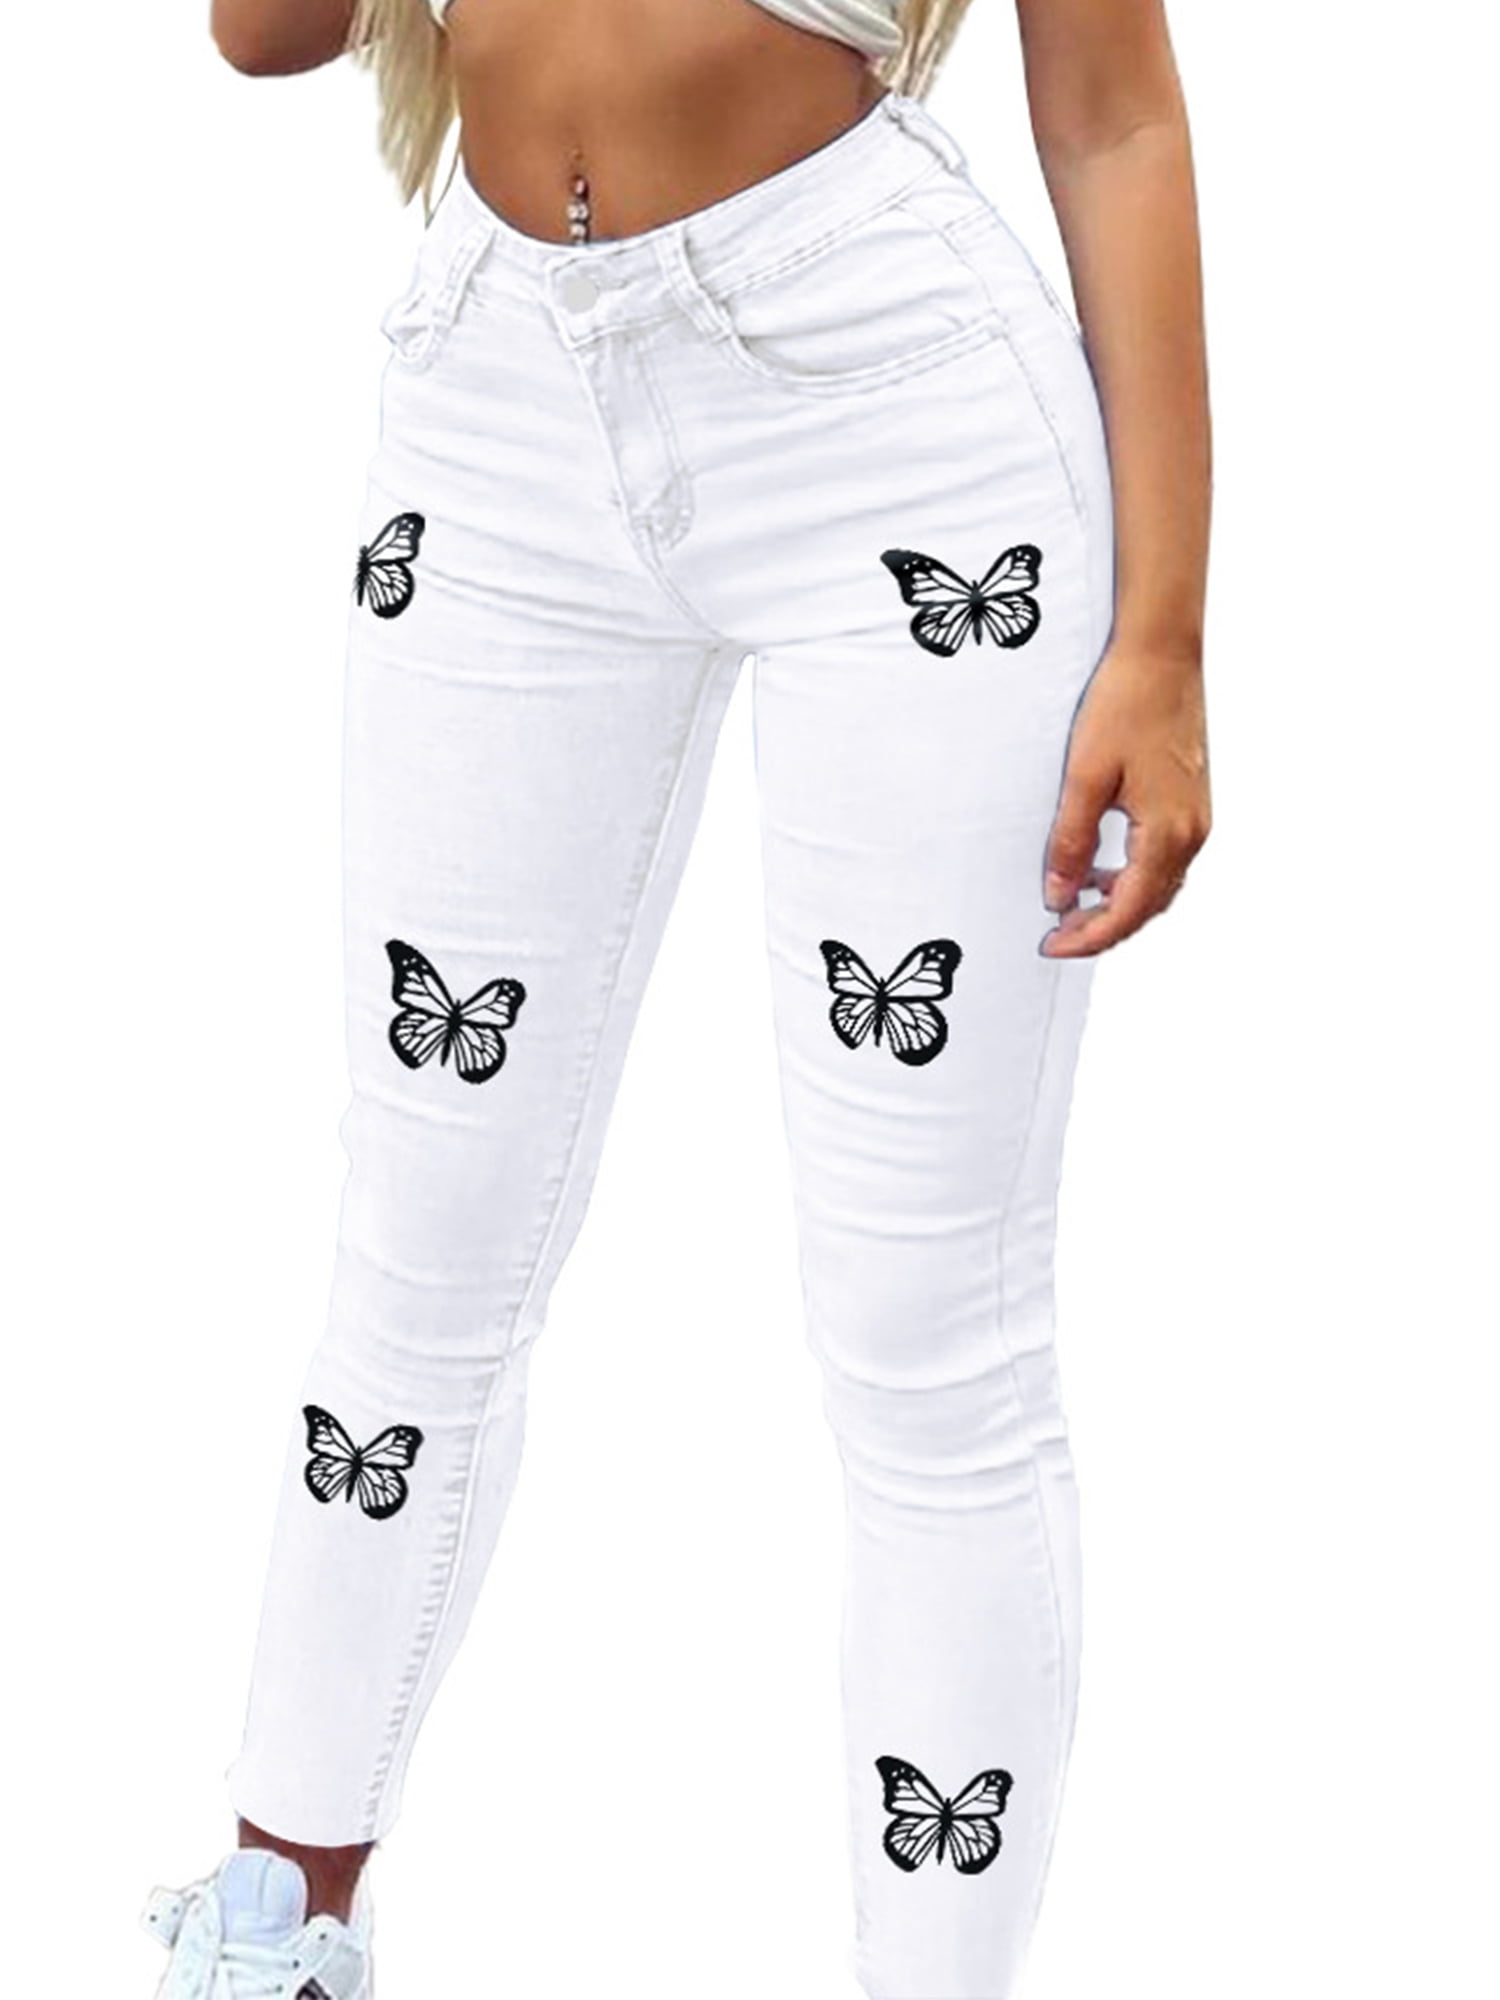 Frontwalk Butterfly Jeans for Teen Girl Fashion Printed Denim Pants Skinny  Stretchy Long Pants with Pockets 